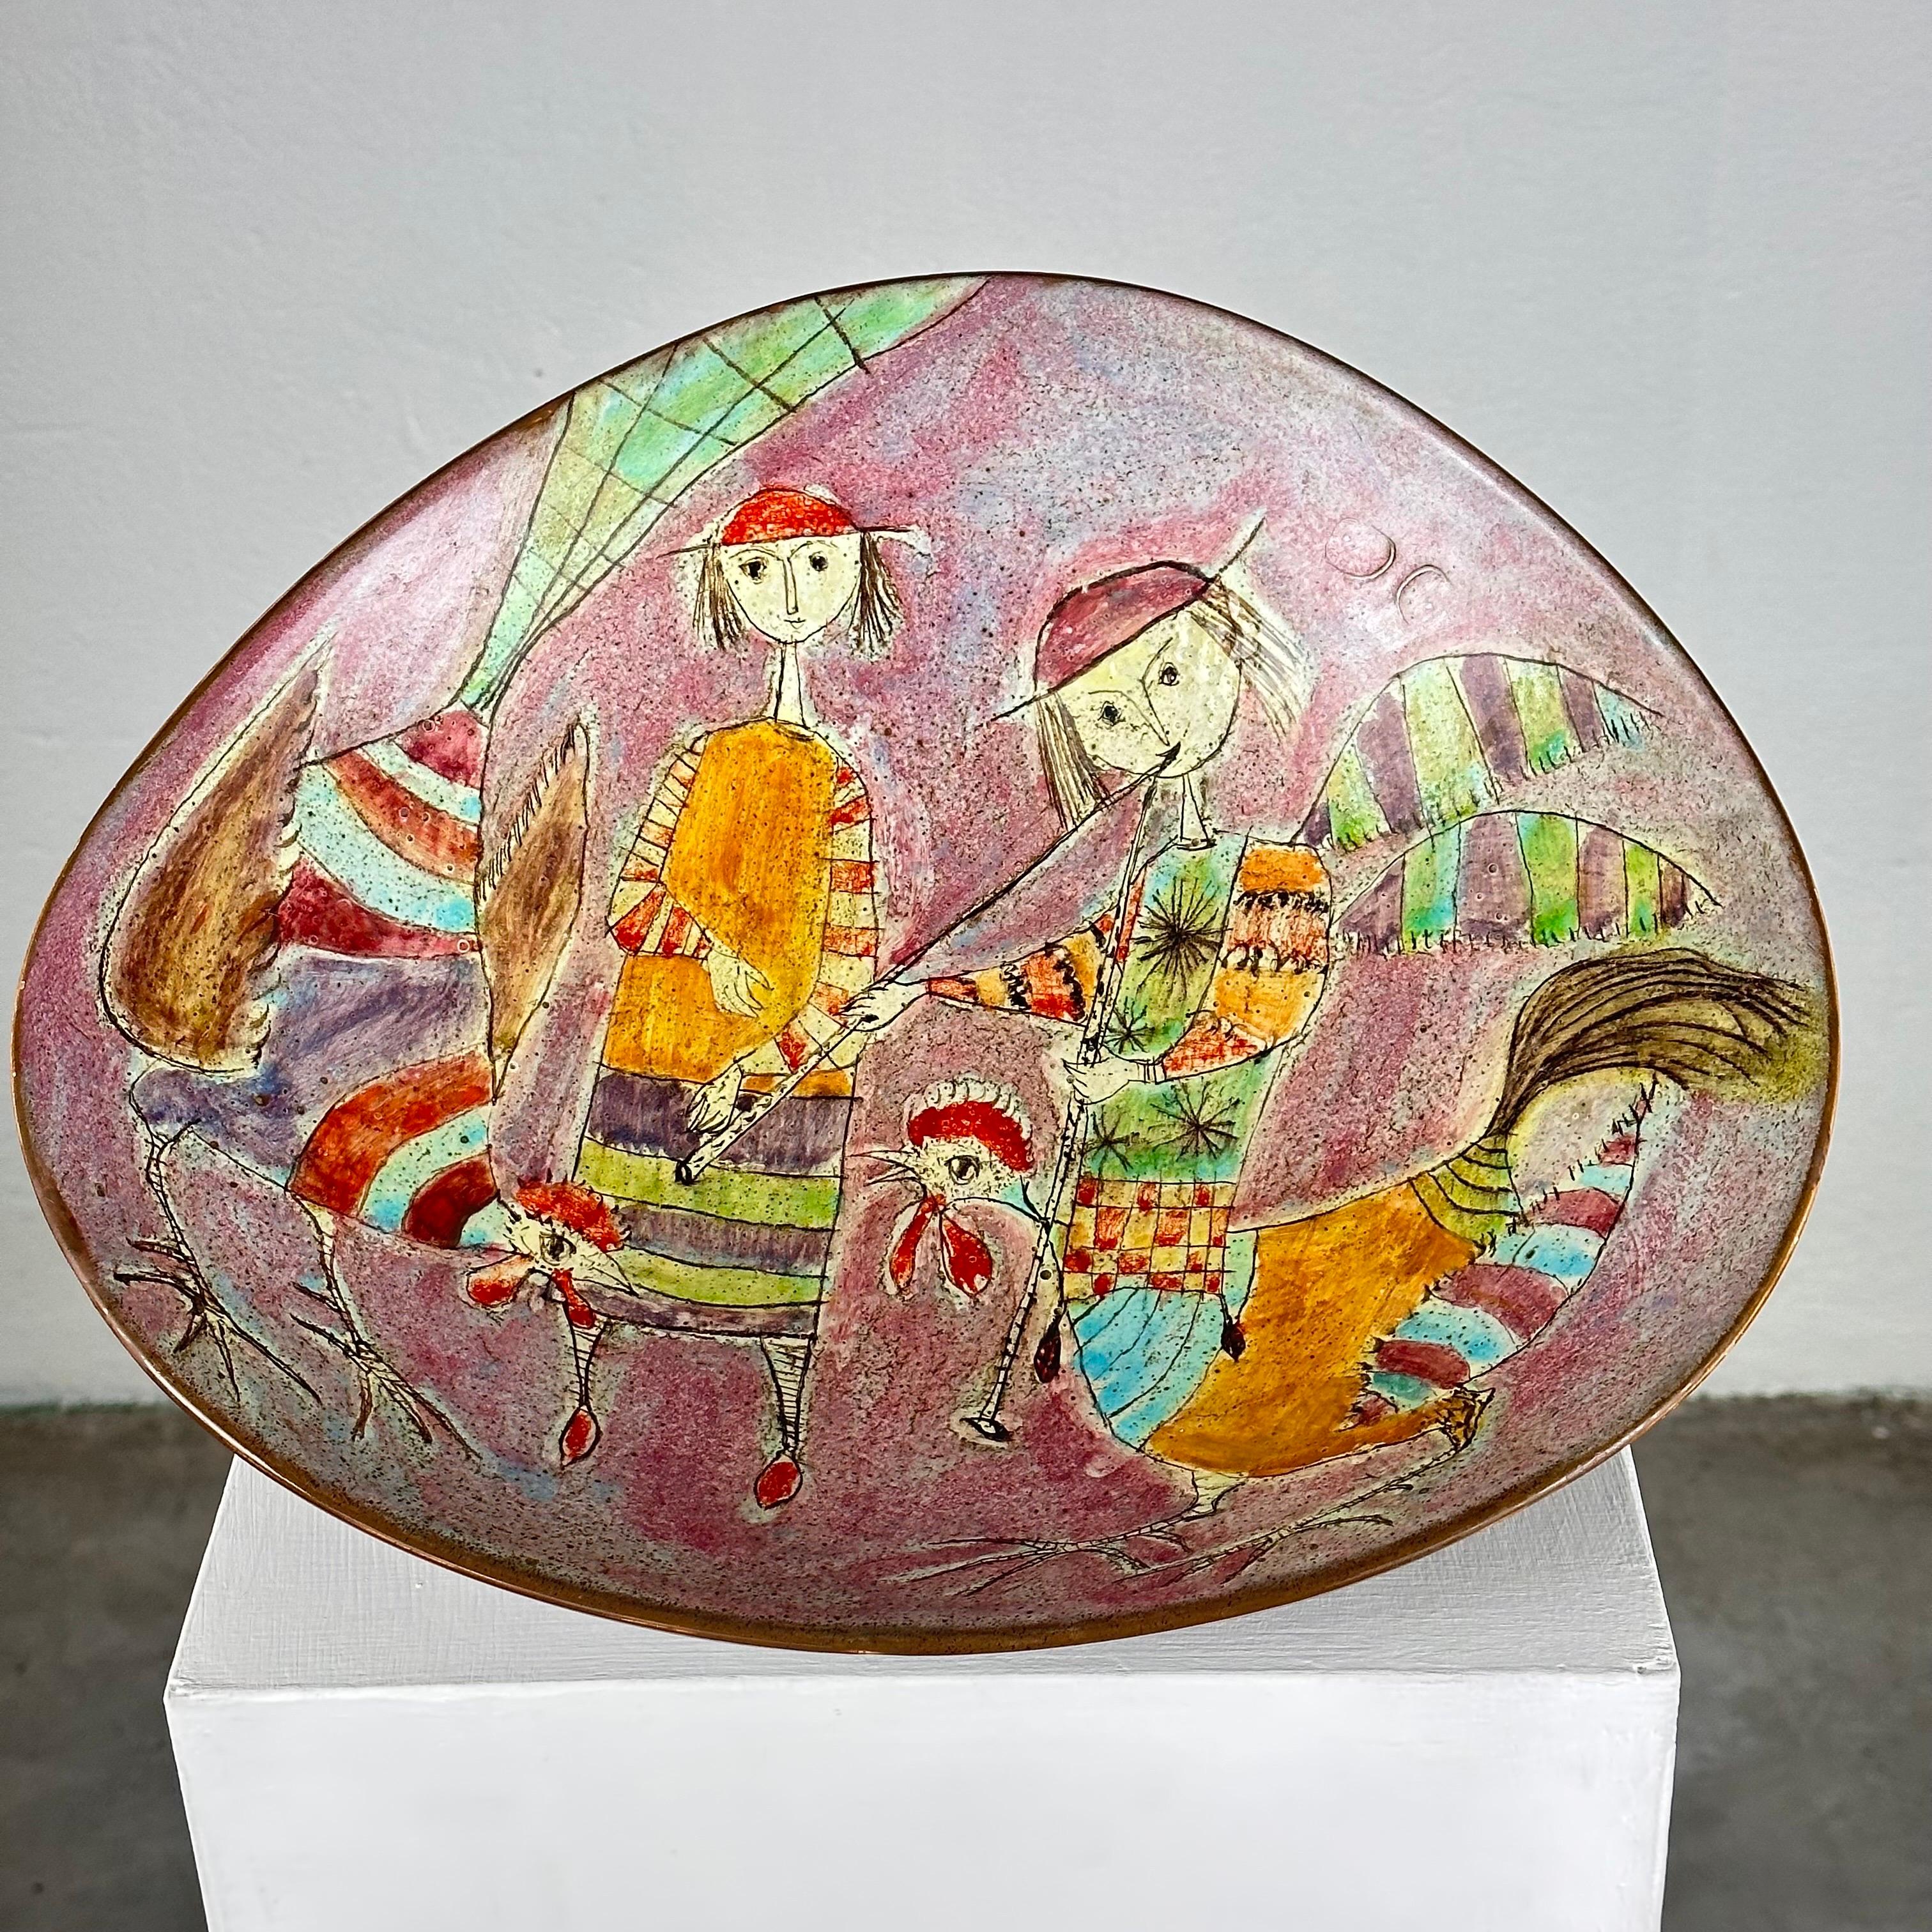 Whimsical Hand-Painted Ceramic Plate by Baratti Pesaro, 1970s  For Sale 2